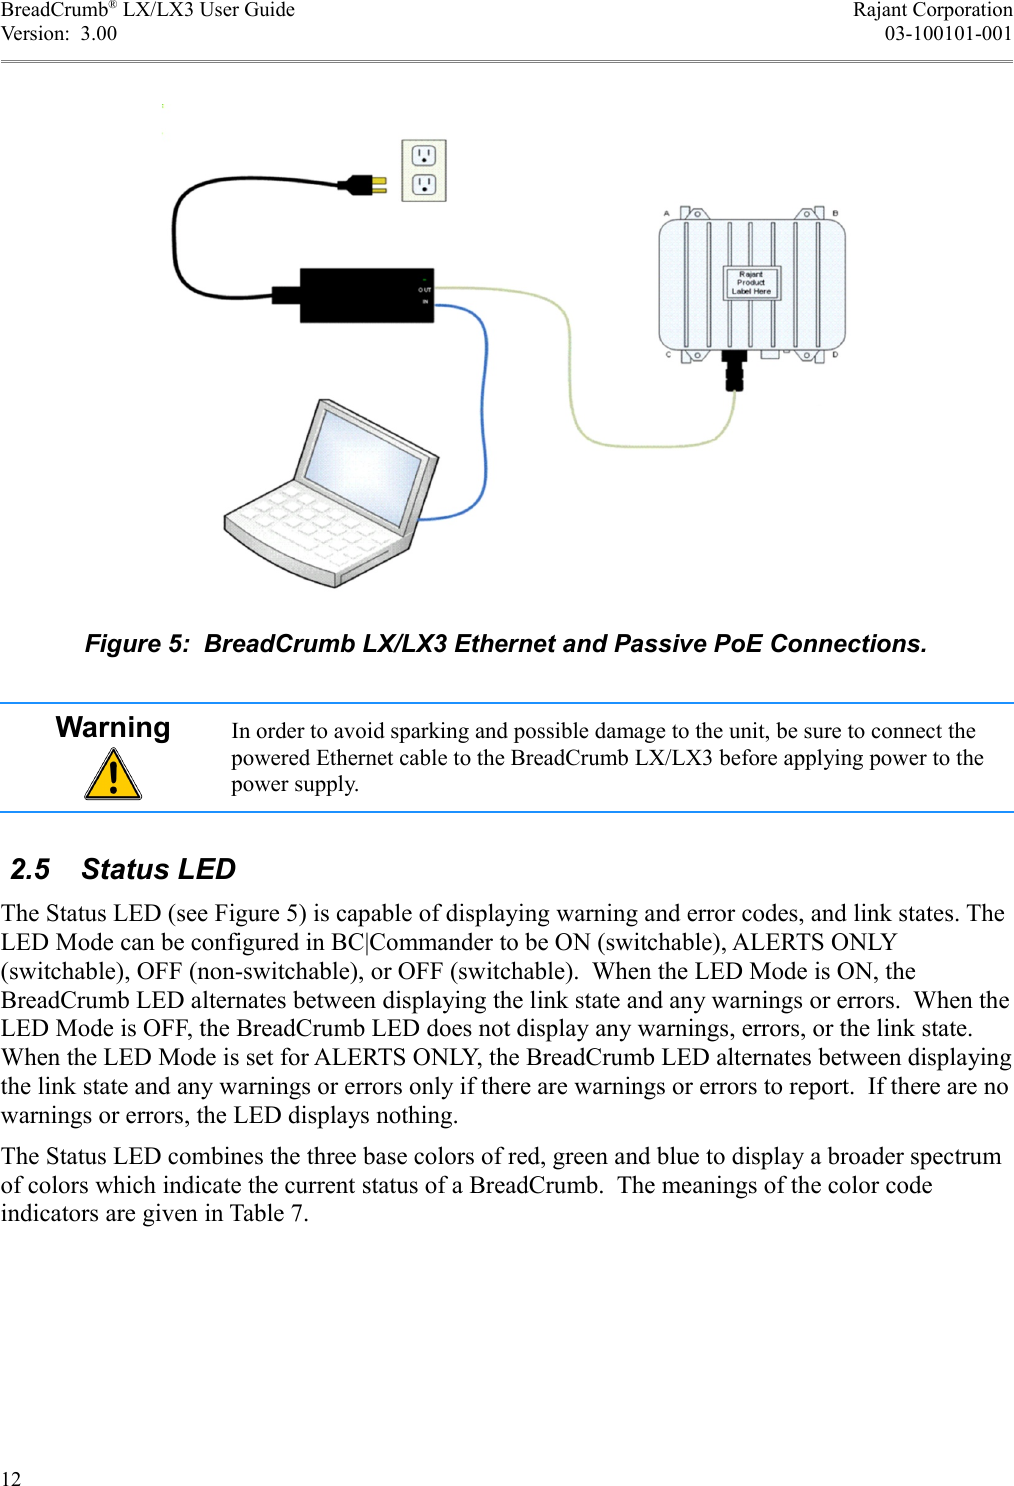 BreadCrumb® LX/LX3 User Guide Rajant CorporationVersion:  3.00 03-100101-001Warning In order to avoid sparking and possible damage to the unit, be sure to connect the powered Ethernet cable to the BreadCrumb LX/LX3 before applying power to the power supply. 2.5  Status LEDThe Status LED (see Figure 5) is capable of displaying warning and error codes, and link states. The LED Mode can be configured in BC|Commander to be ON (switchable), ALERTS ONLY (switchable), OFF (non-switchable), or OFF (switchable).  When the LED Mode is ON, the BreadCrumb LED alternates between displaying the link state and any warnings or errors.  When the LED Mode is OFF, the BreadCrumb LED does not display any warnings, errors, or the link state. When the LED Mode is set for ALERTS ONLY, the BreadCrumb LED alternates between displaying the link state and any warnings or errors only if there are warnings or errors to report.  If there are no warnings or errors, the LED displays nothing.The Status LED combines the three base colors of red, green and blue to display a broader spectrum of colors which indicate the current status of a BreadCrumb.  The meanings of the color code indicators are given in Table 7.12Figure 5:  BreadCrumb LX/LX3 Ethernet and Passive PoE Connections.